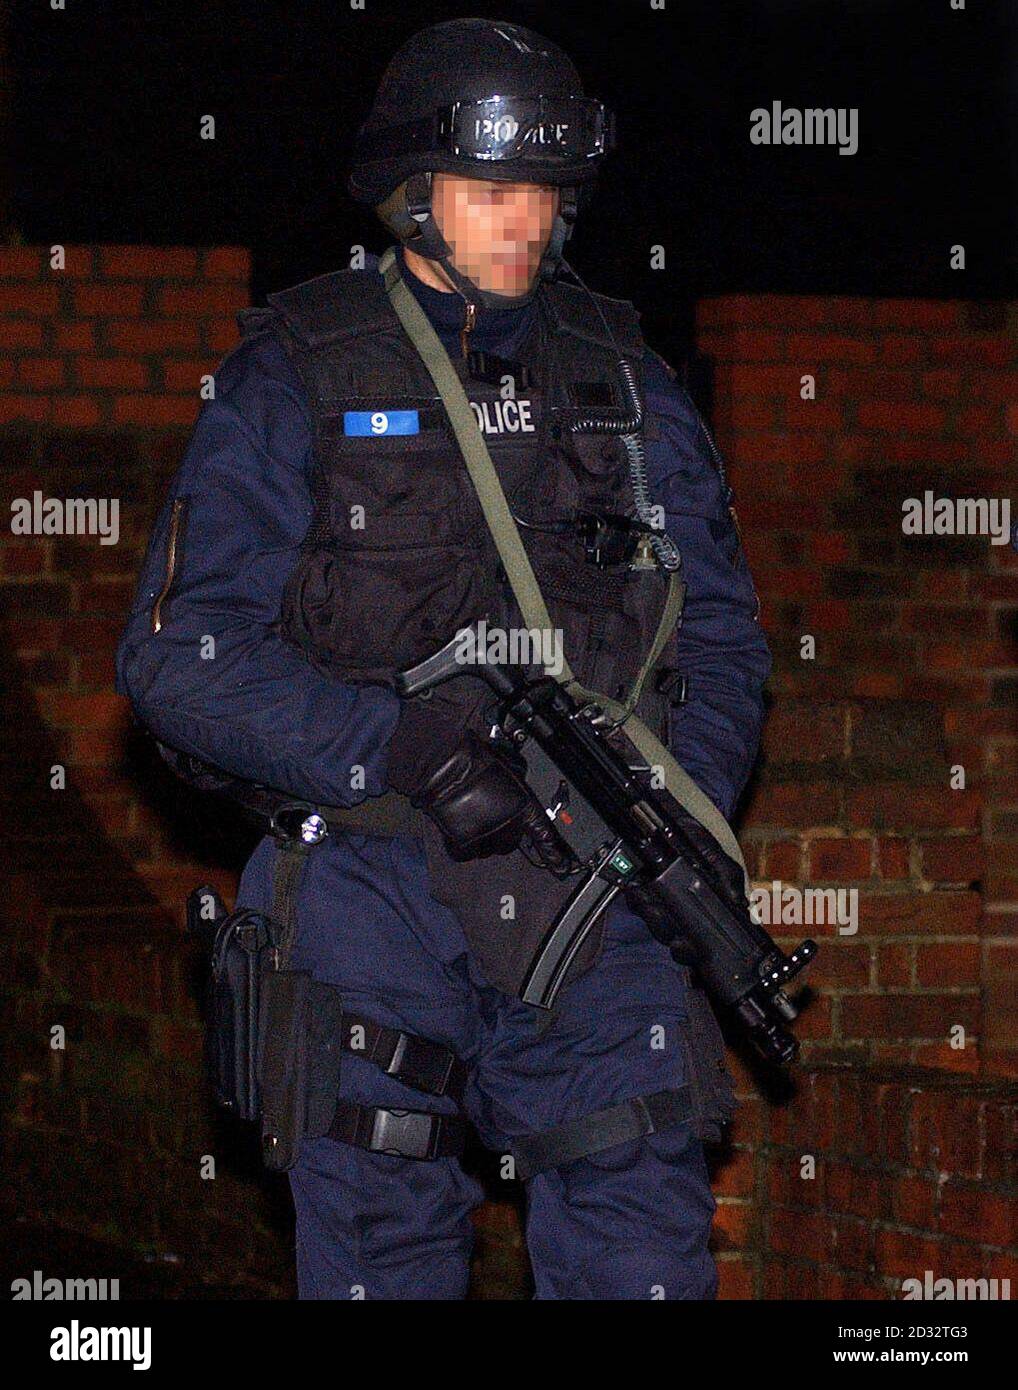 An armed police officer in Edgware, north London, during an overnight operation as Scotland Yard launched a series of co-ordinated raids on what they described as probably the biggest organised crime group in the UK.   *  500 officers raided homes, businesses and gambling dens linked to a notorious Turkish family who are described as 'kingpins' in the international heroin smuggling trade with interests in the UK, Turkey, Holland and the rest of Europe. Stock Photo